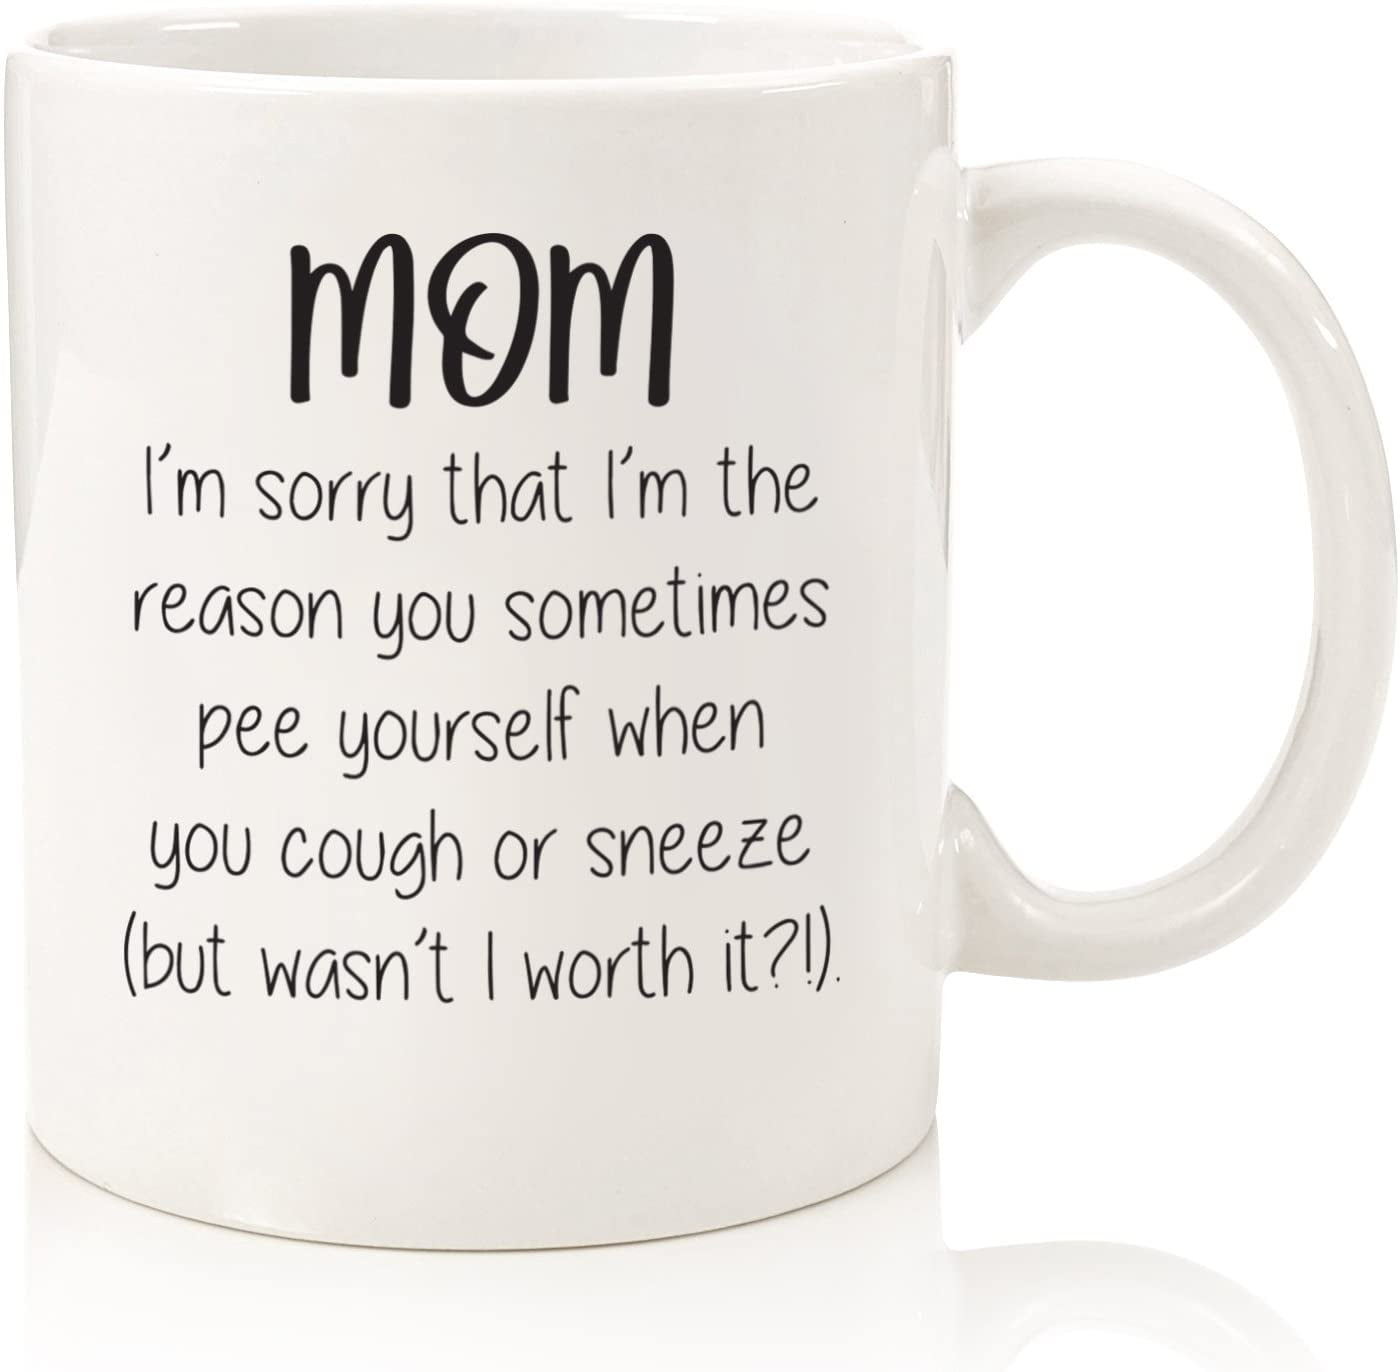 Discover 179+ gifts for your mother super hot